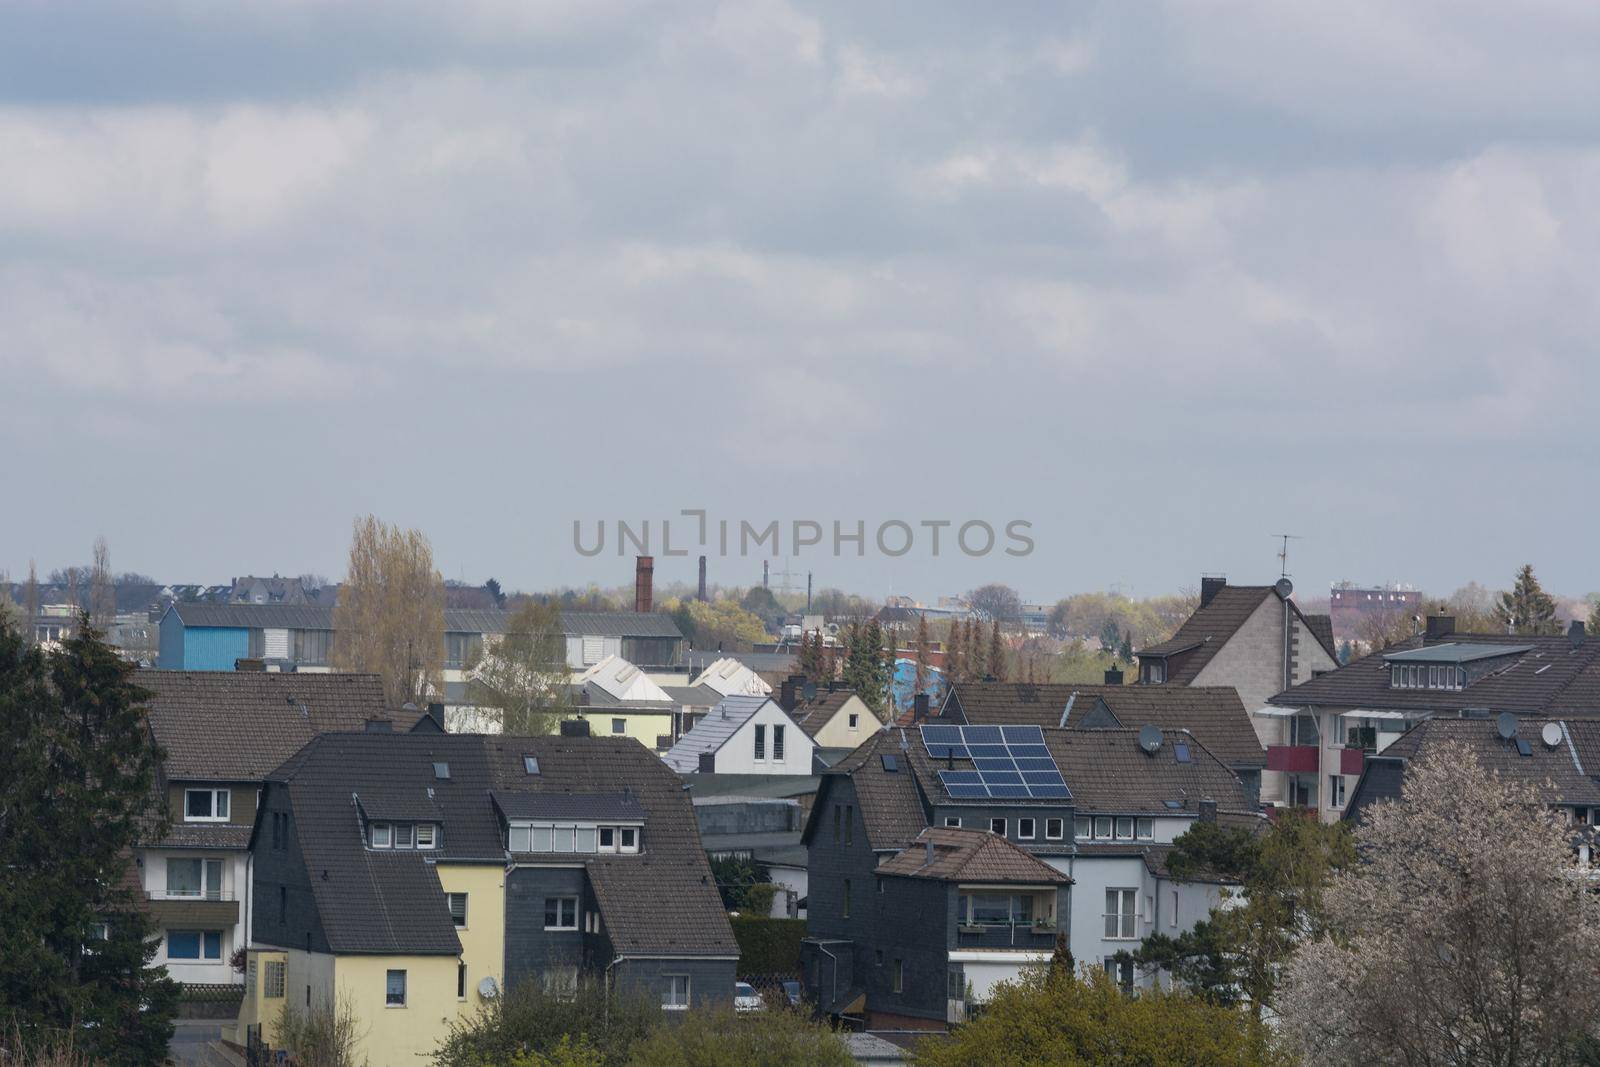 Panoramic view of the city of Velbert        by JFsPic